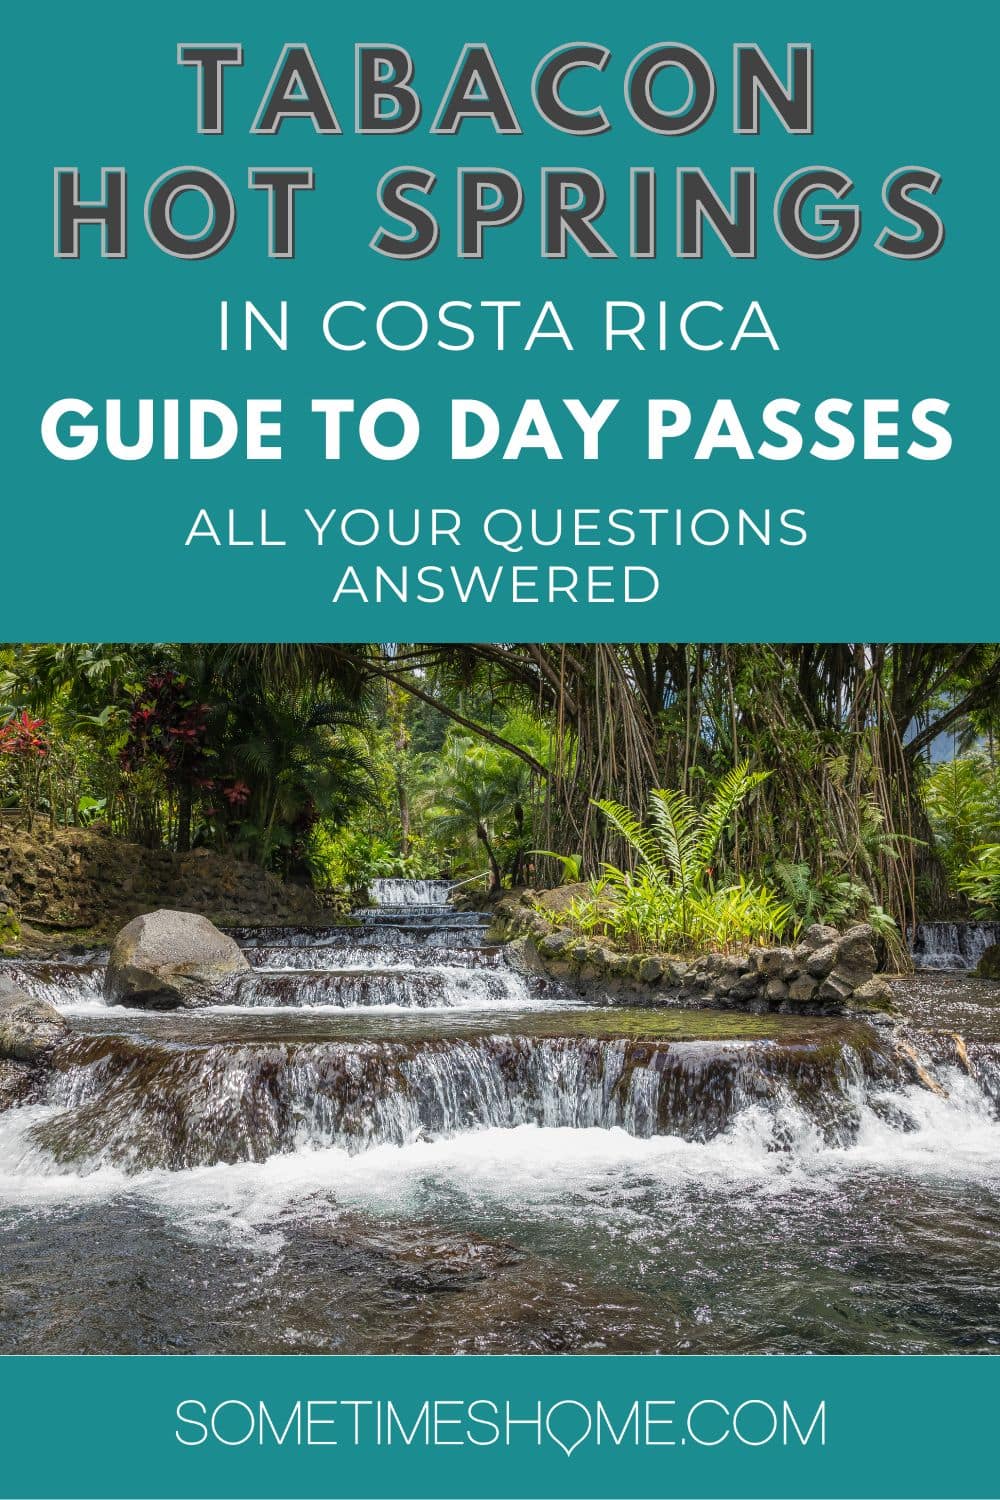 Tabacon Hot Springs in Costa Rica, Guide to Day Passes and all your questions answered.